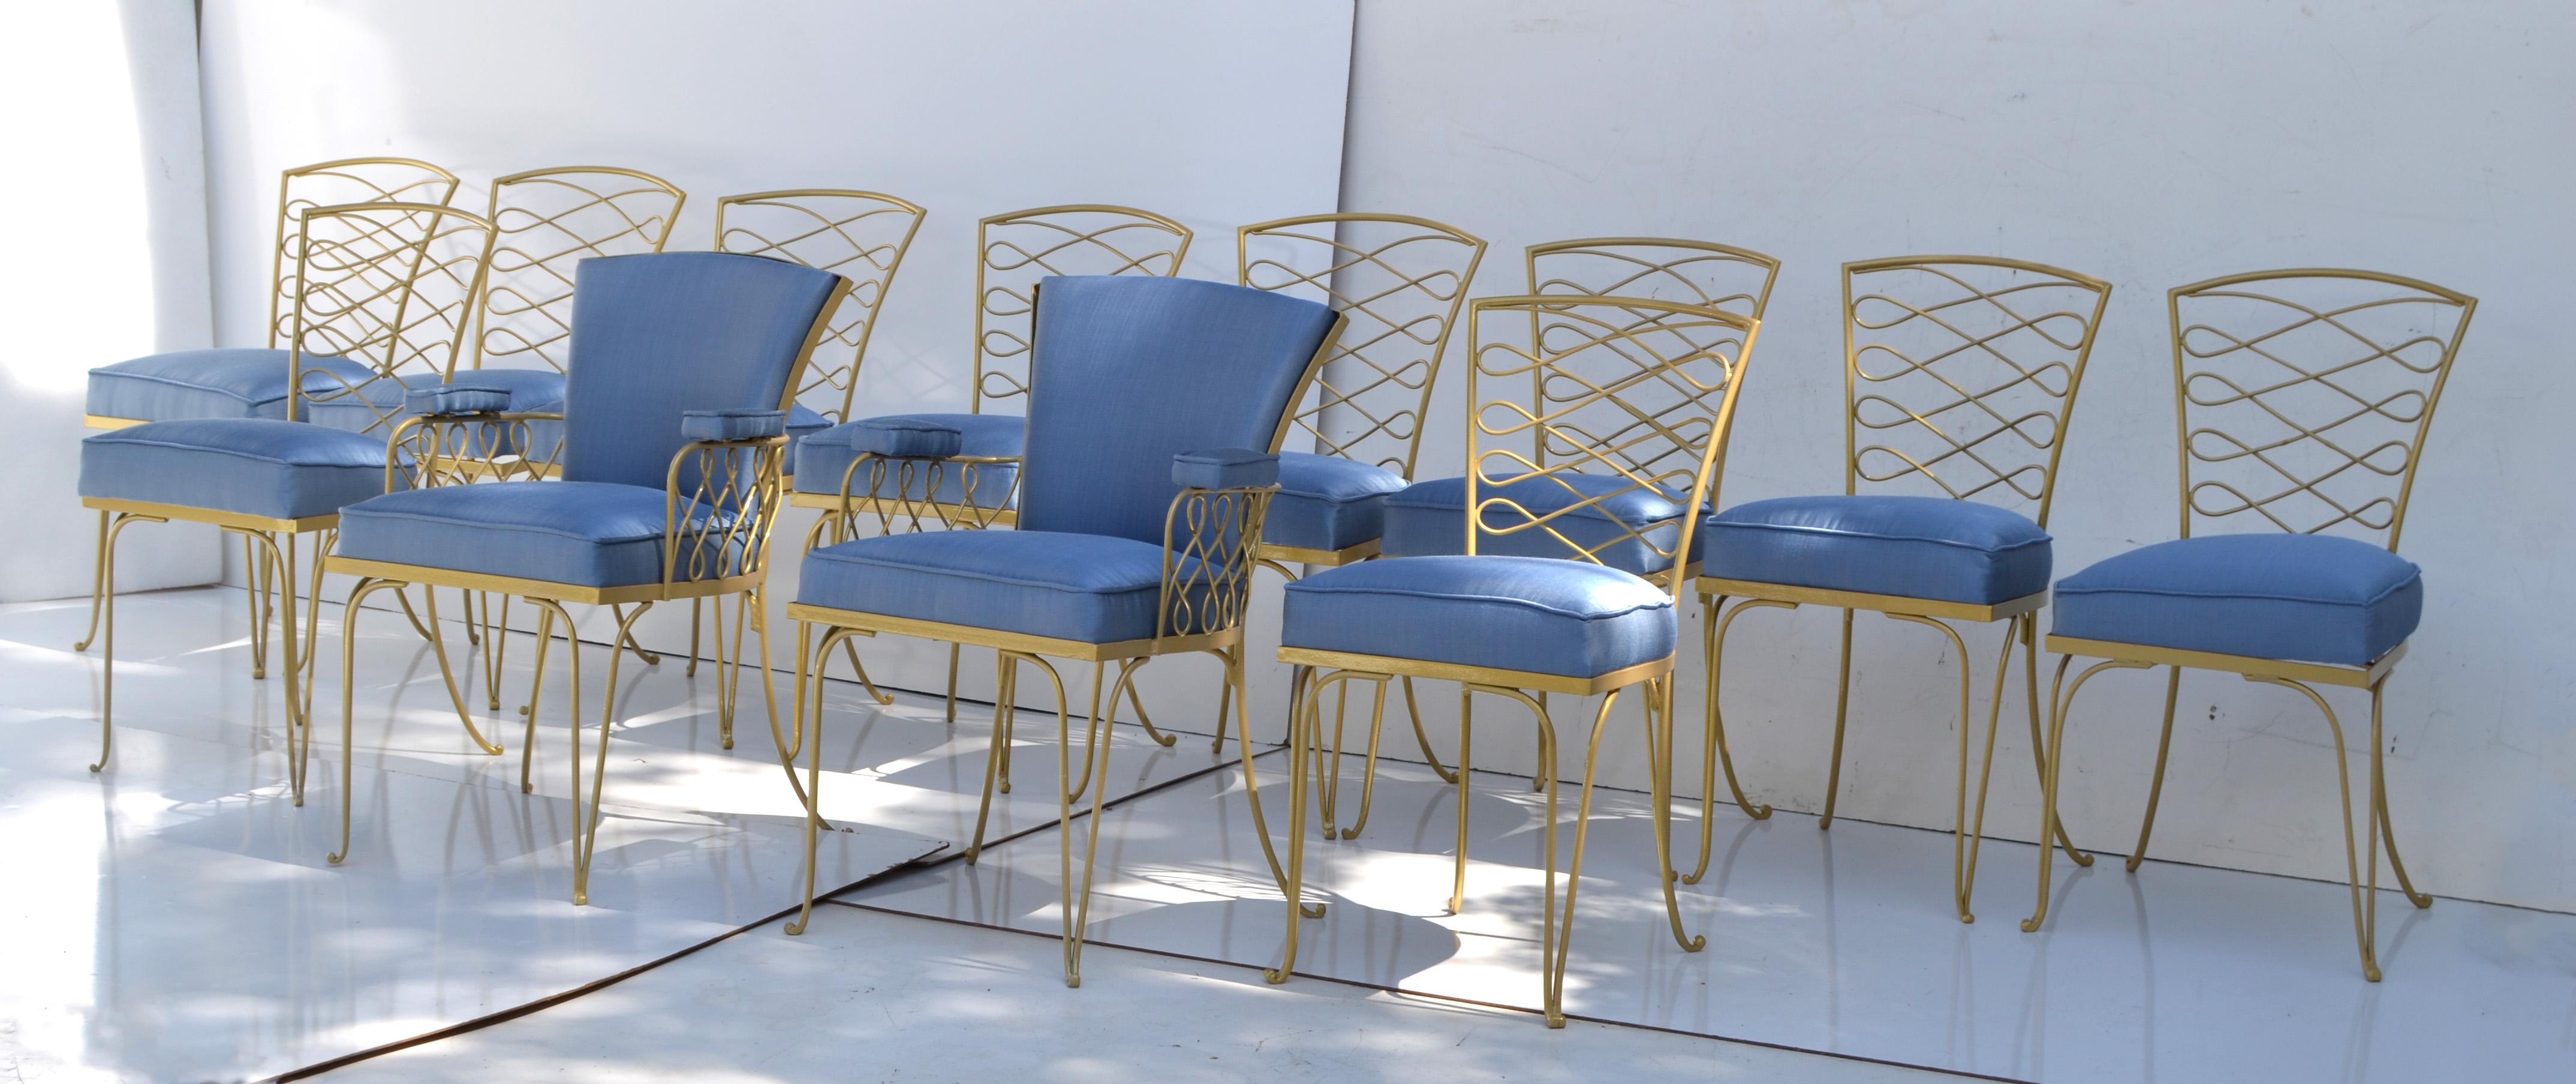 Set of 14 René Prou Art Deco Gold Wrought Iron Dining Room Chairs Blue Fabric  For Sale 12